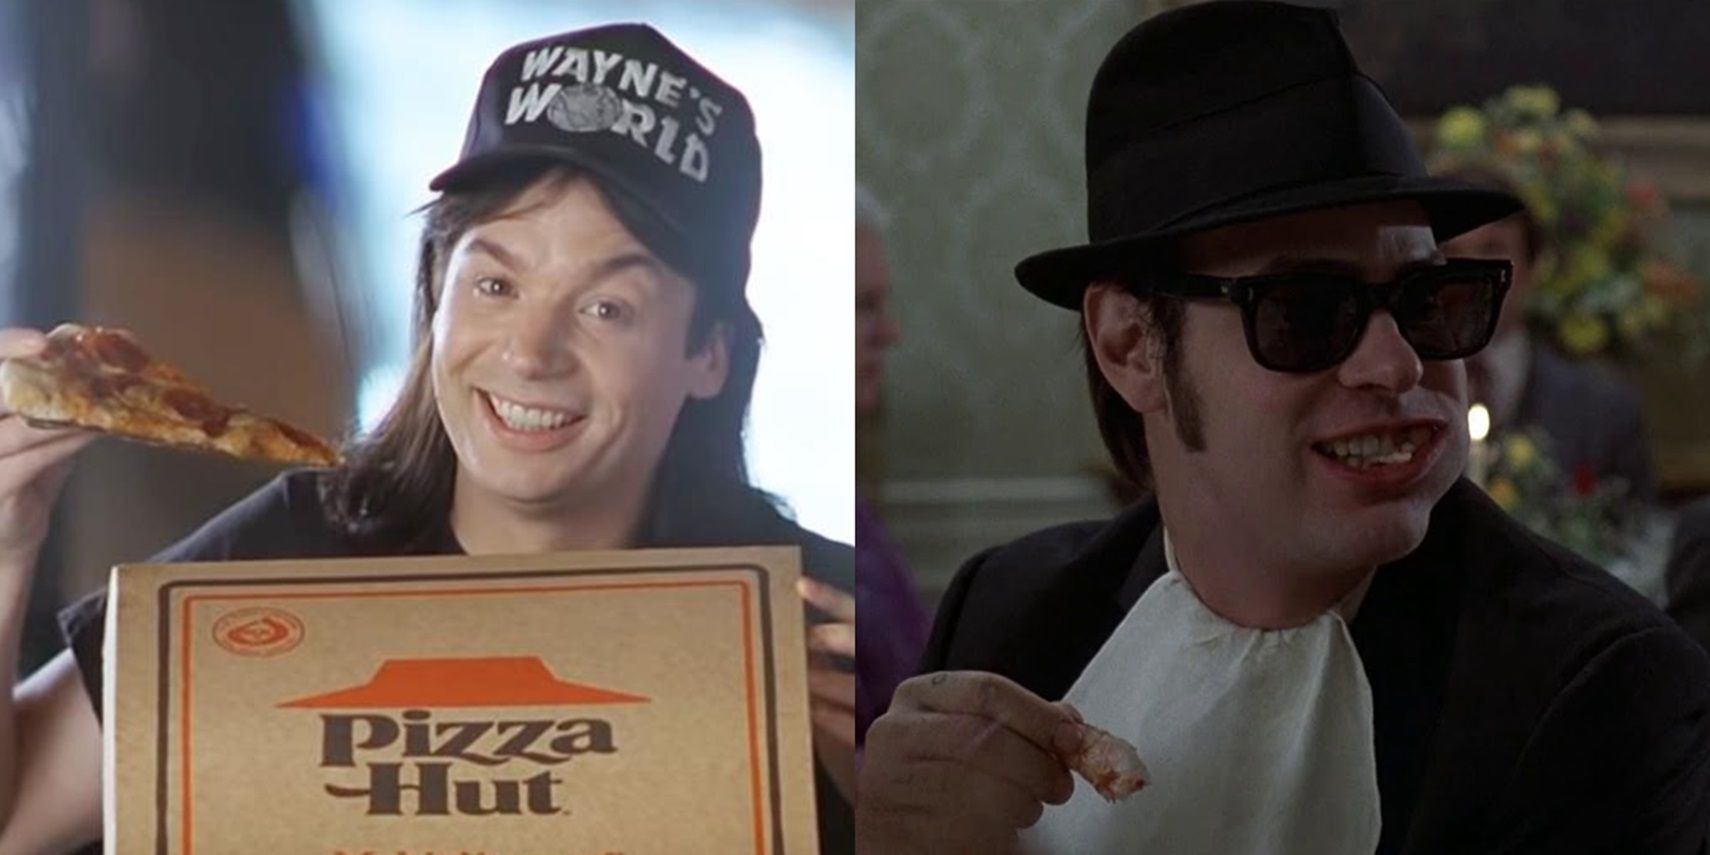 Mike Myers in Wayne's World and Dan Aykroyd in The Blues Brothers